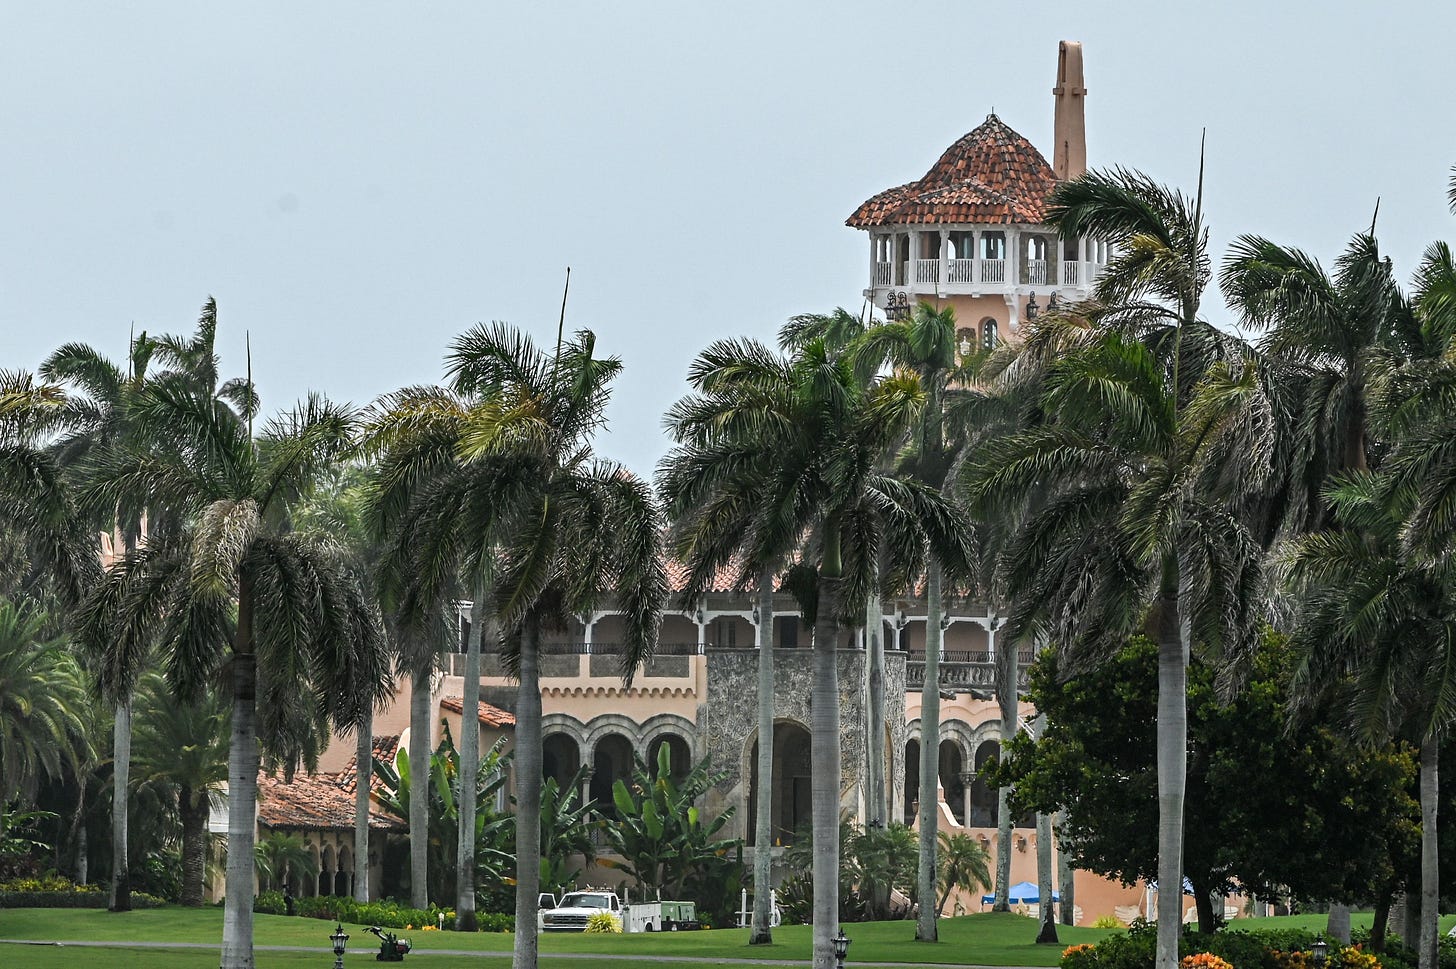 The residence of former US President Donald Trump at Mar-A-Lago in Palm Beach, Florida, on August 9, 2022. (Photo by Giorgio Viera / AFP via Getty Images)